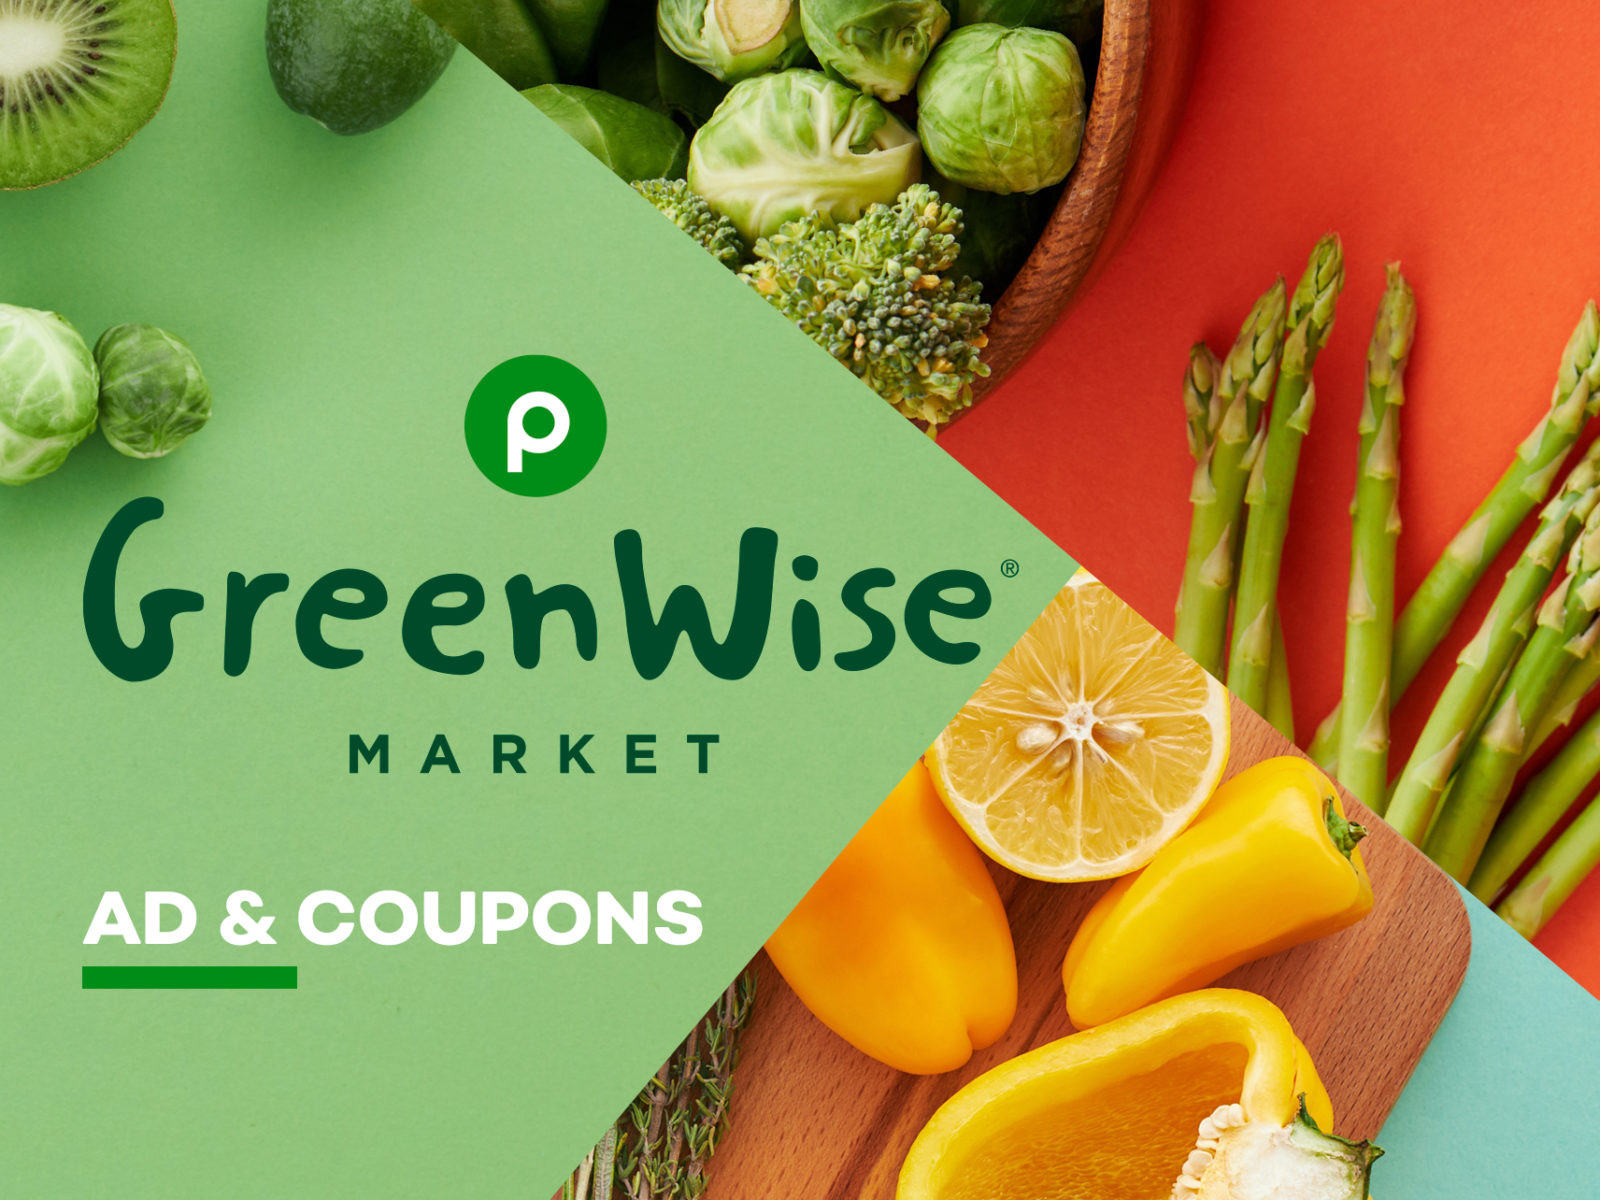 Publix GreenWise Market Ad & Coupons Week Of 10/19 to 10/25 (10/18 to 10/24 For Some)